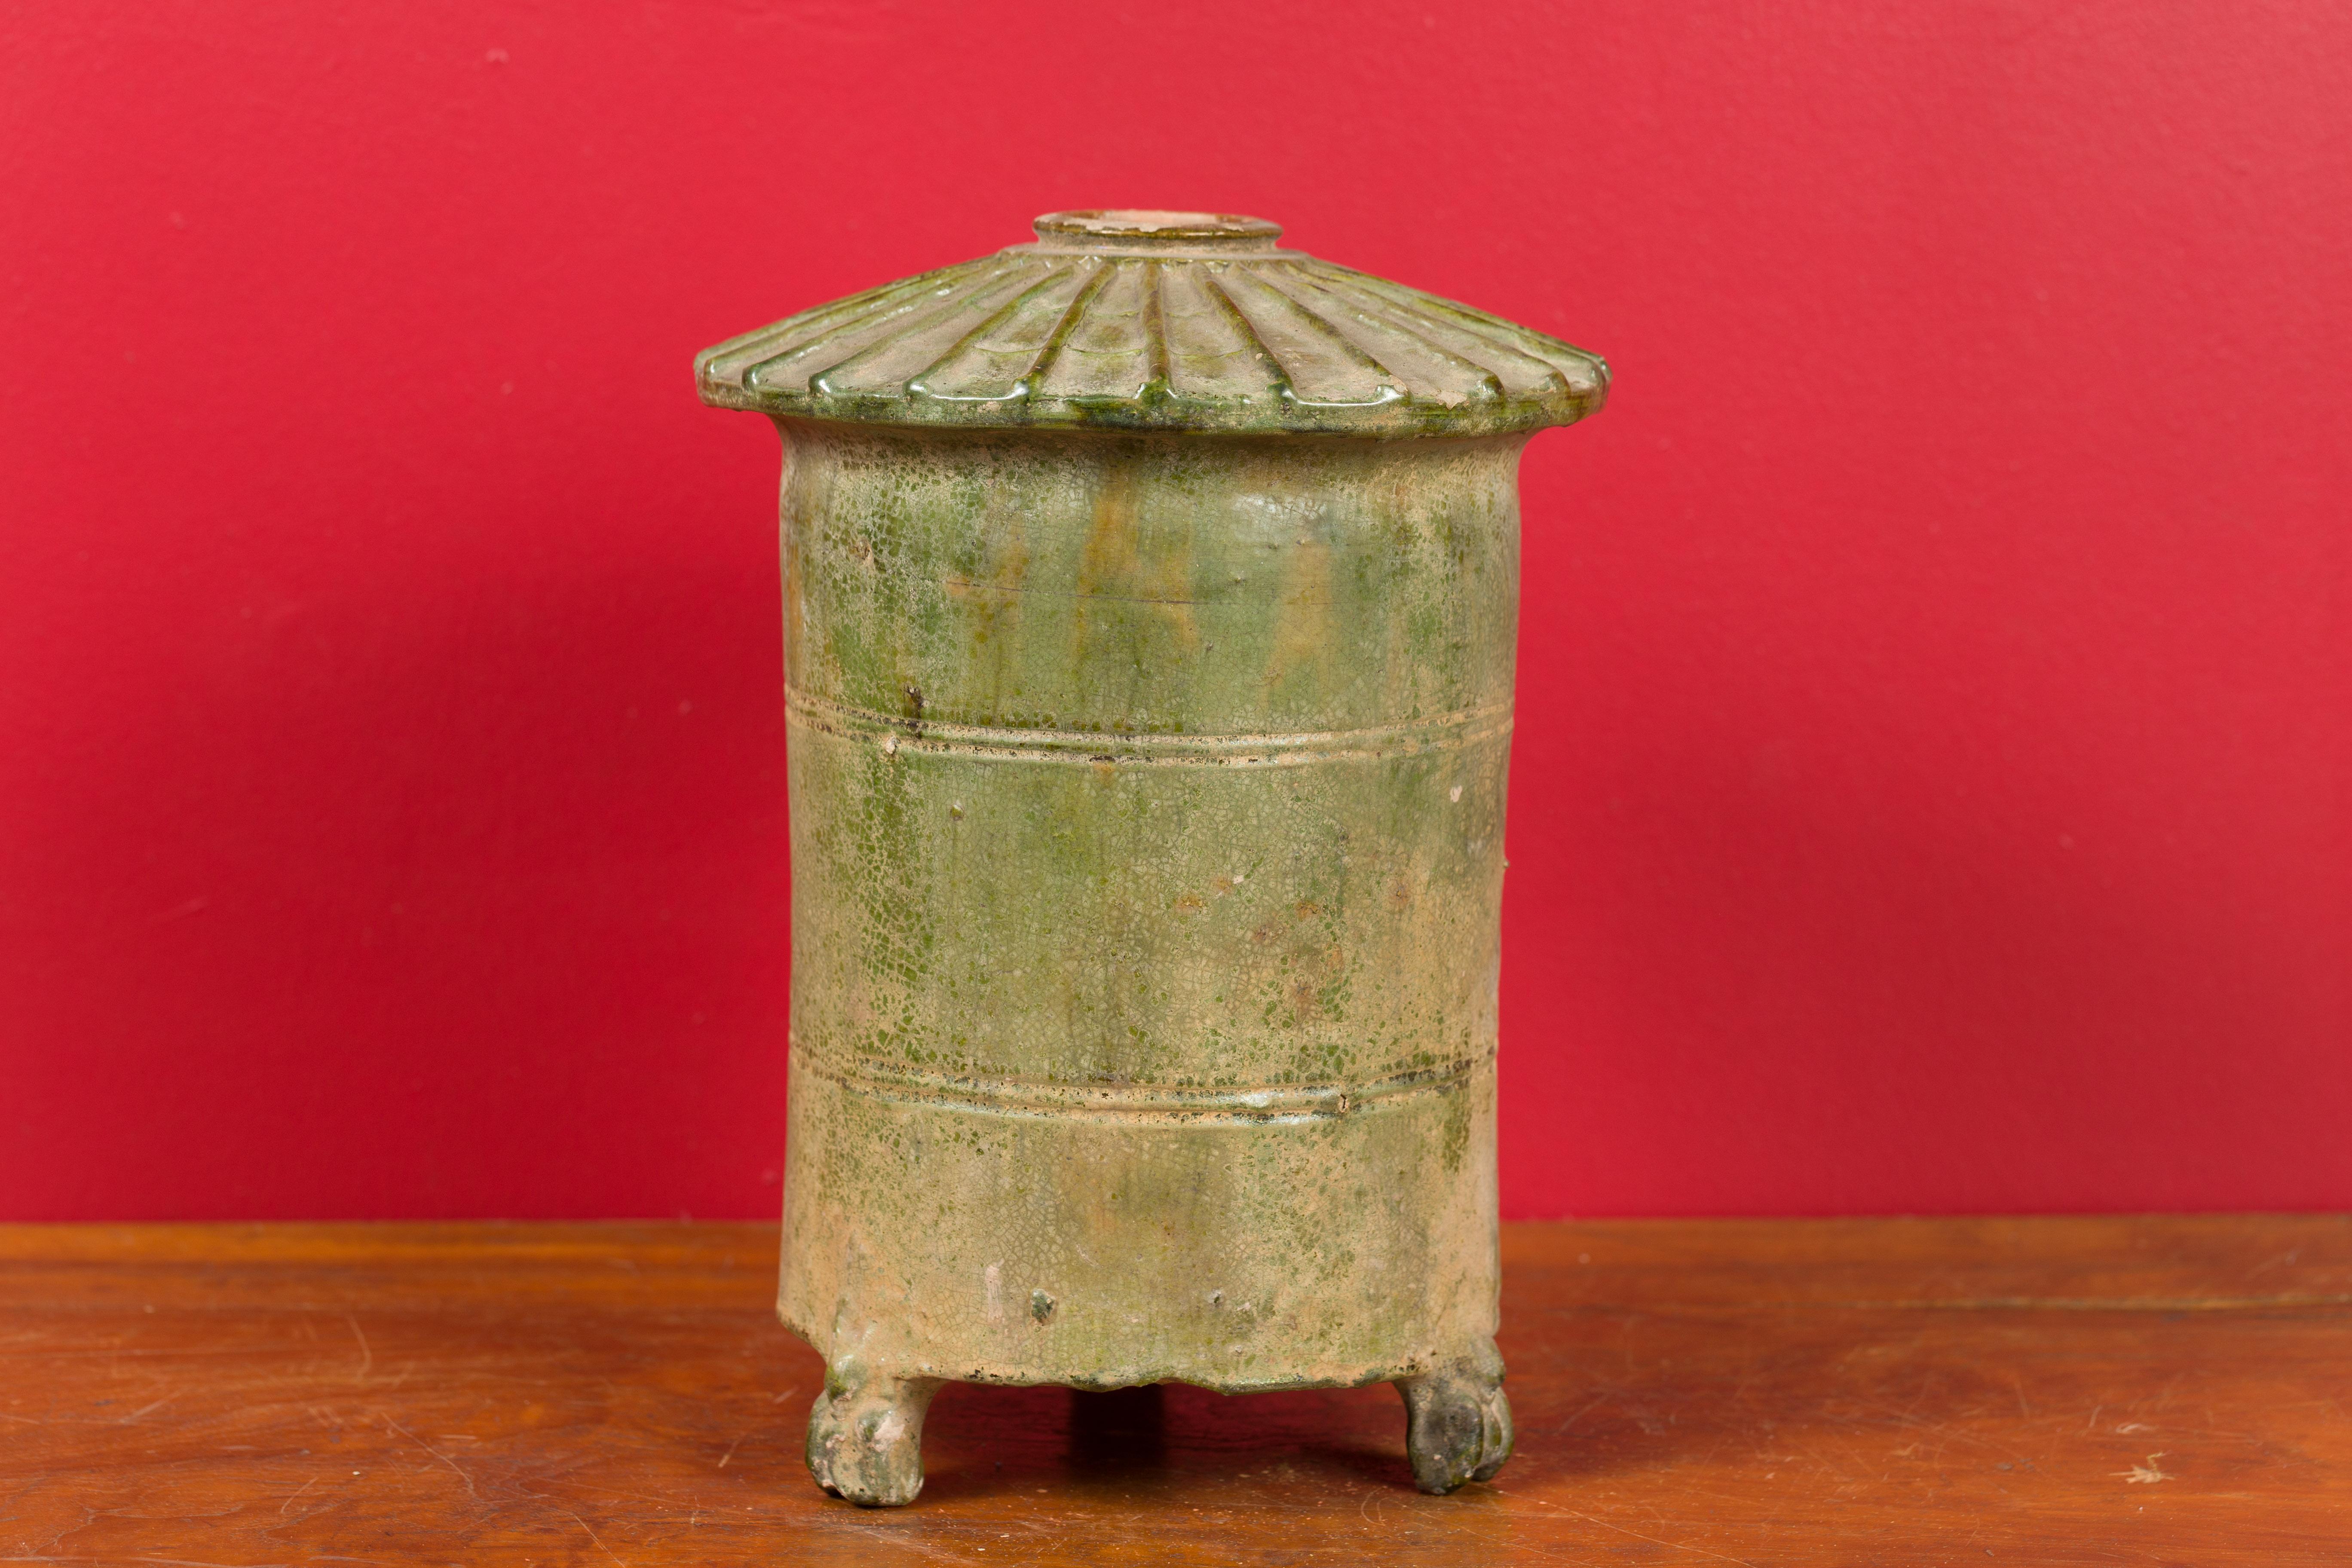 Petit Chinese Ming Dynasty 17th Century Terracotta Granary with Verdigris Patina In Good Condition For Sale In Yonkers, NY